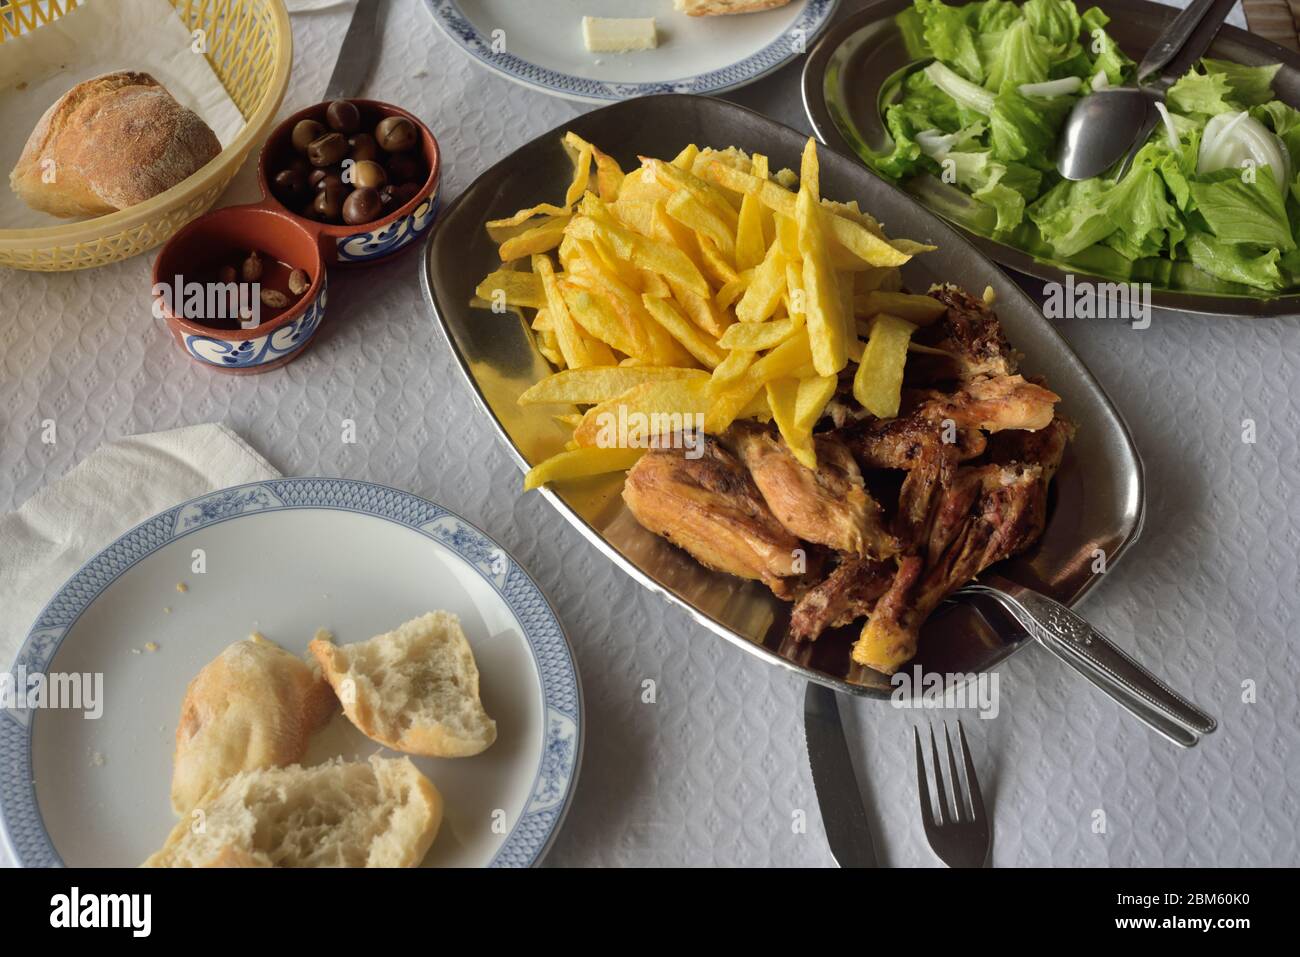 A simple meal at a roadside cafe in Portugal - grilled chicken,chips,bread,olives,salad Stock Photo